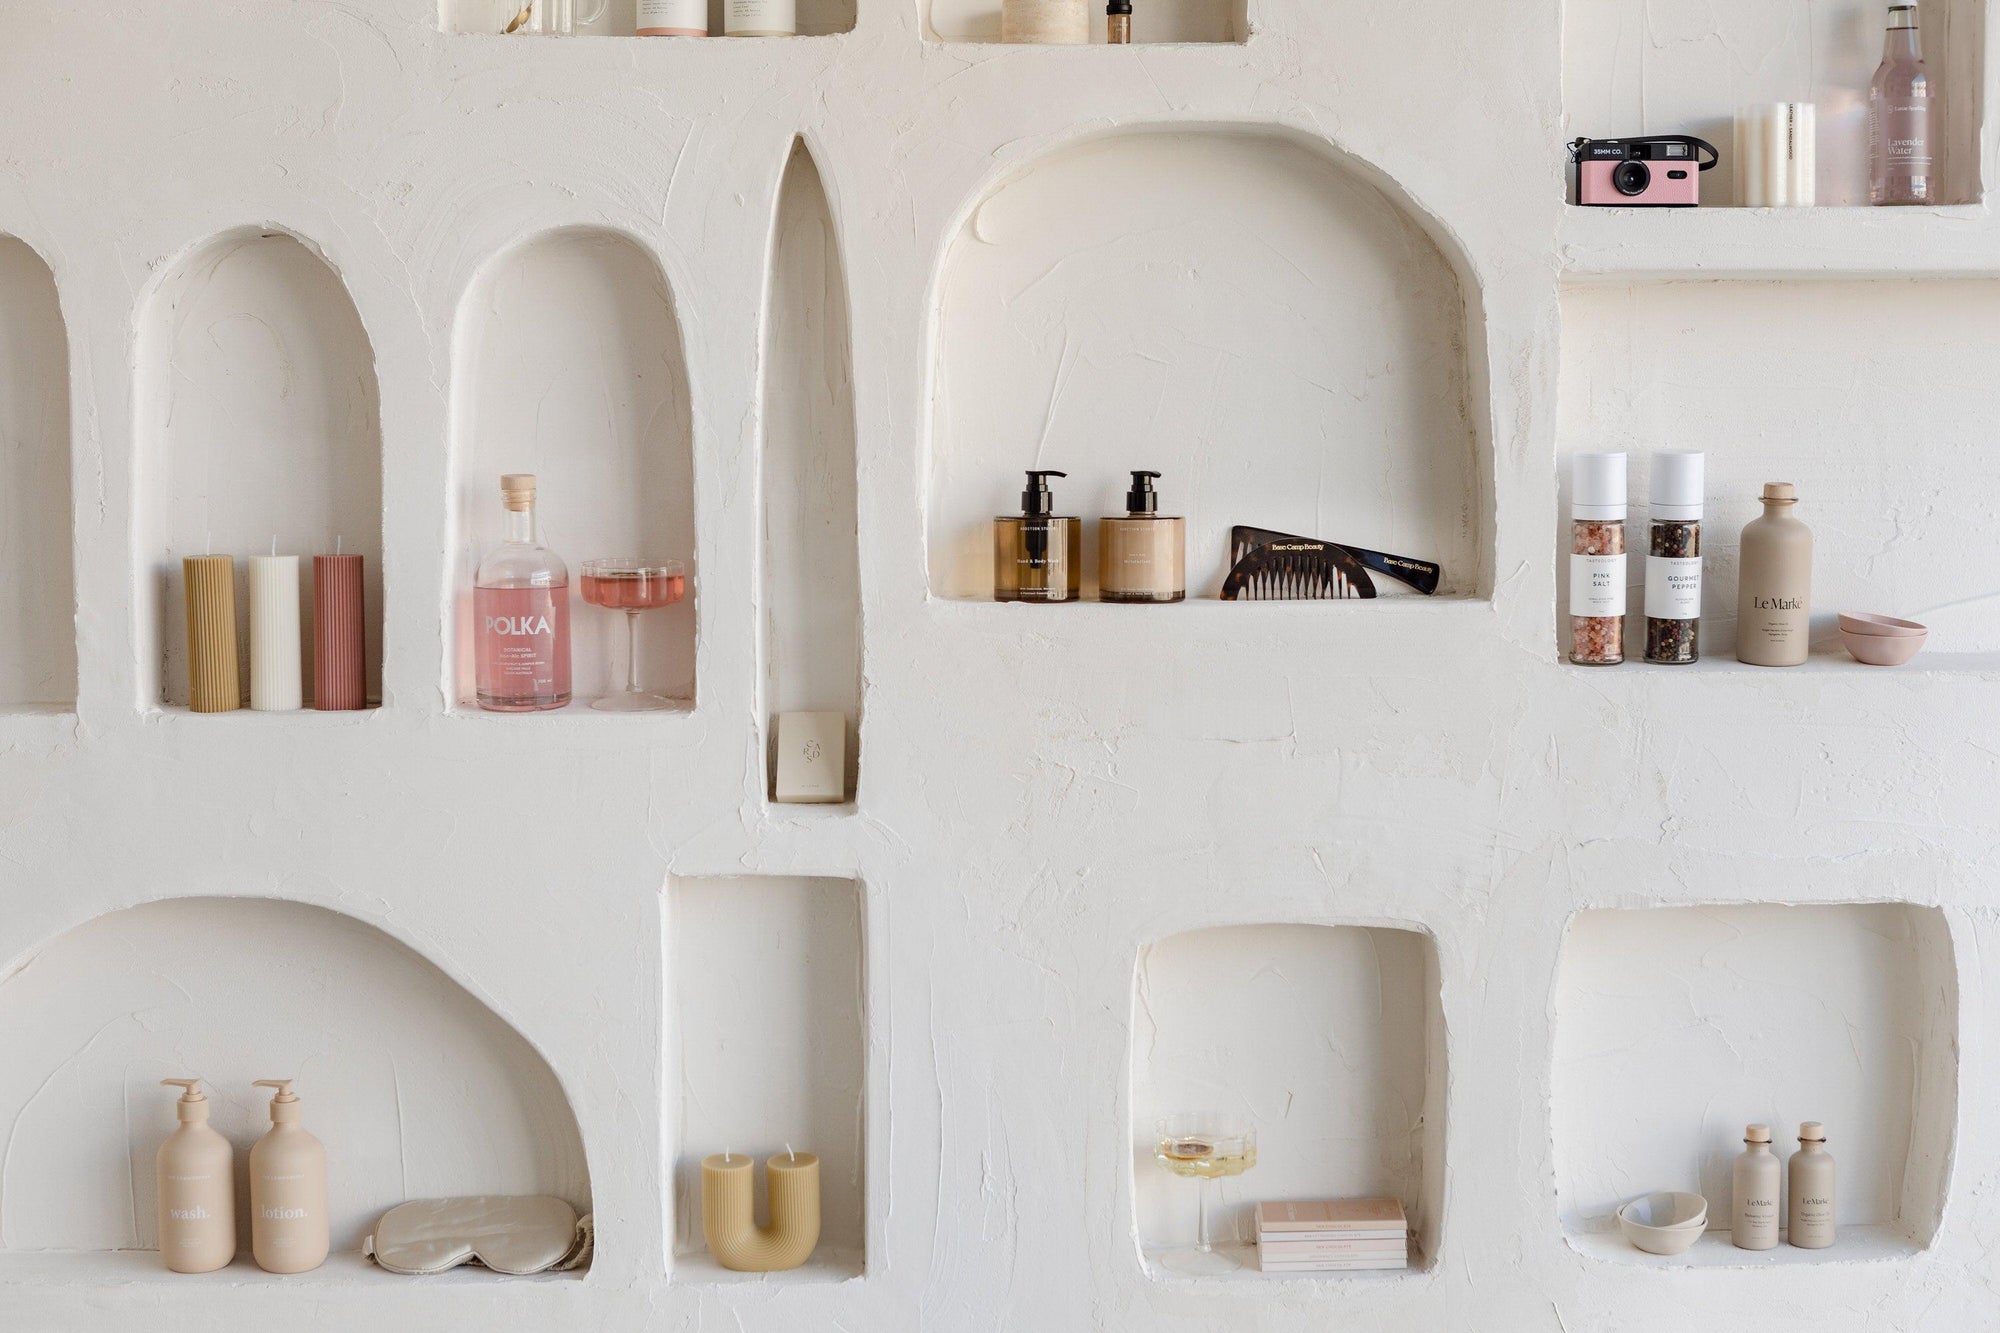 A white wall with shelves filled with BigLittleGifting's "Curate Your Own" cosmetics.